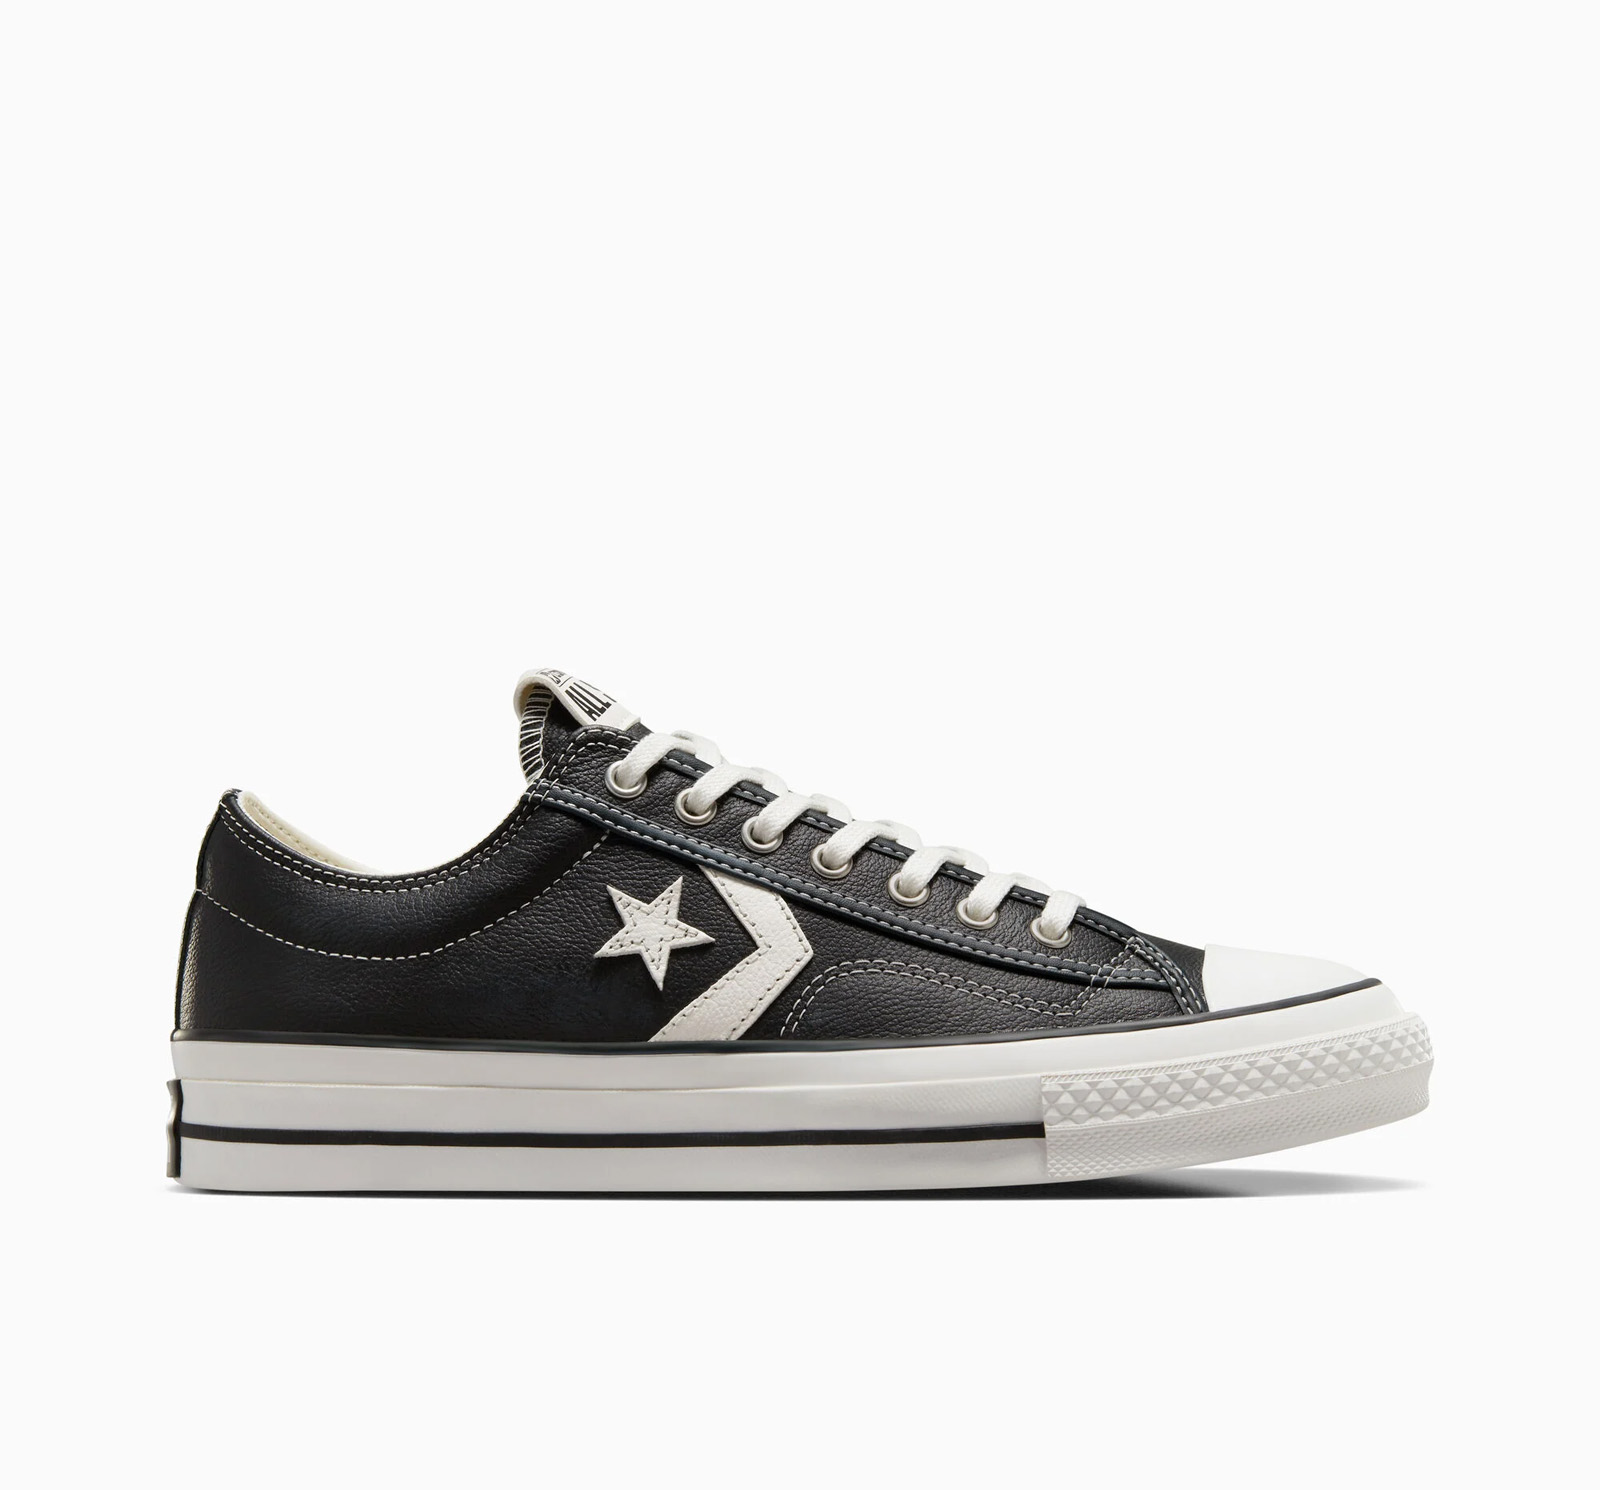 Converse - STAR PLAYER 76 FALL LEATHER - 001-BLACK/VINTAGE WHITE/SILVER Ανδρικά > Παπούτσια > Sneaker > Παπούτσι Low Cut